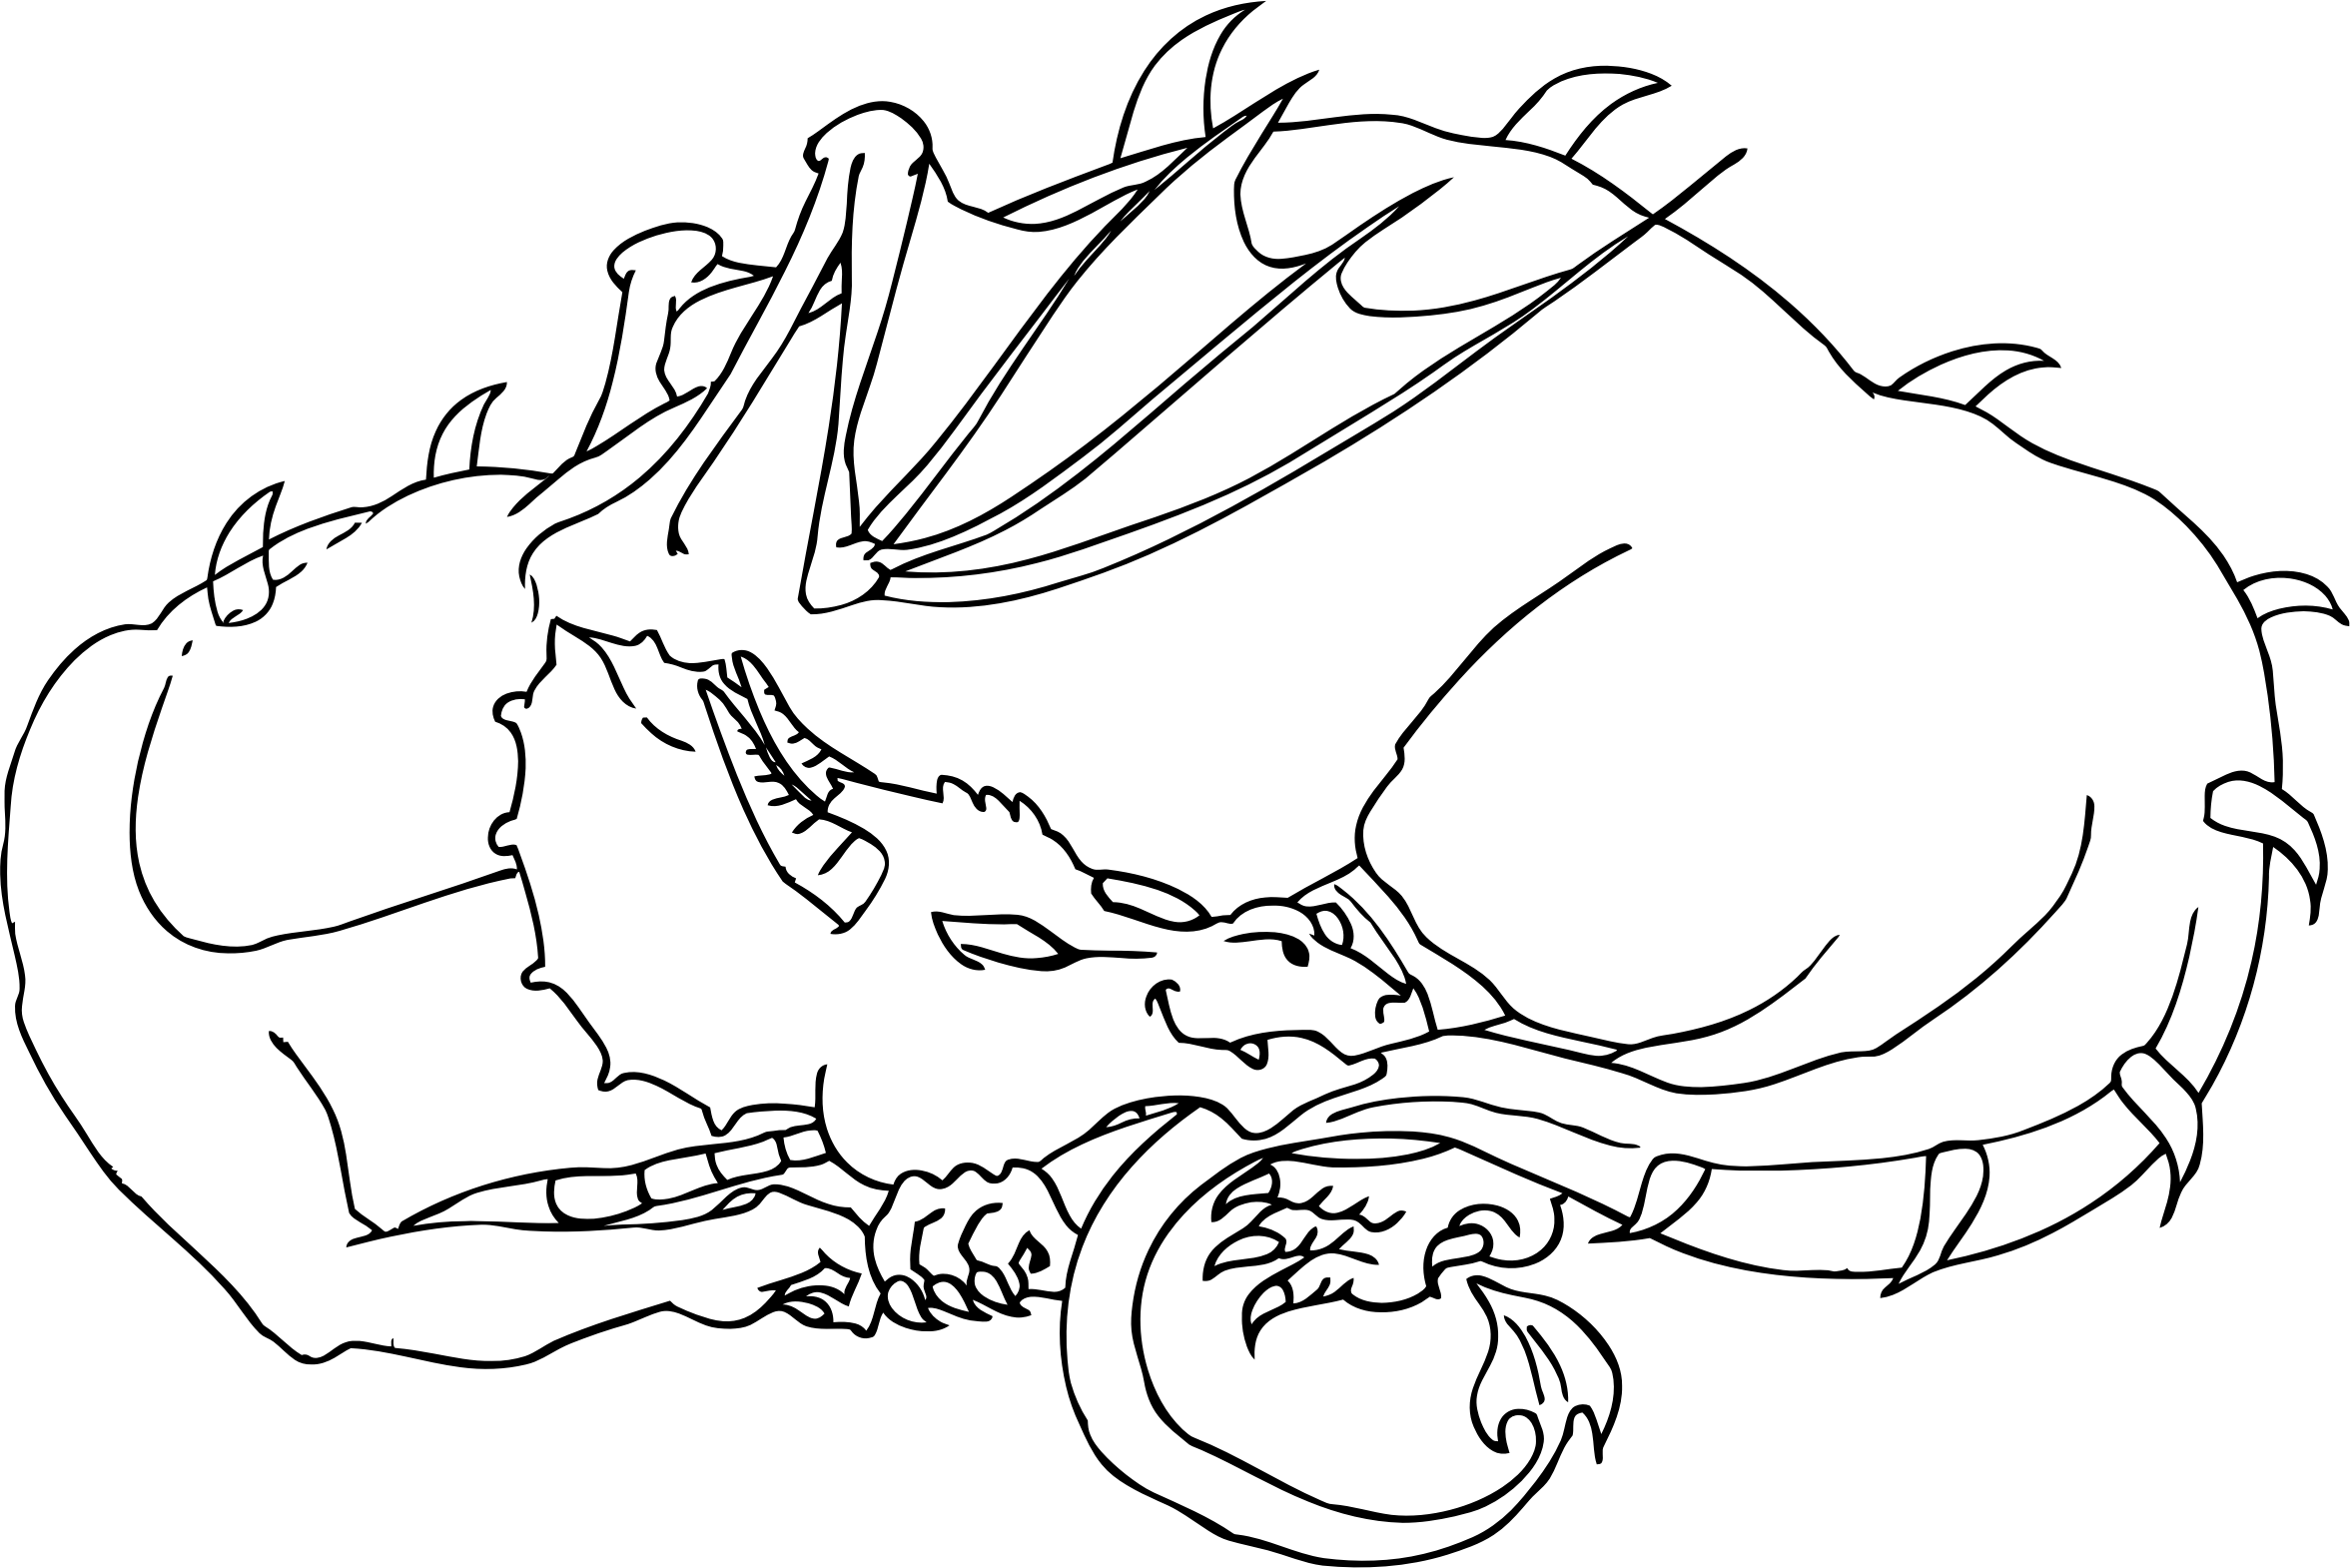 This Free Icons Png Design Of Sleeping Dragon